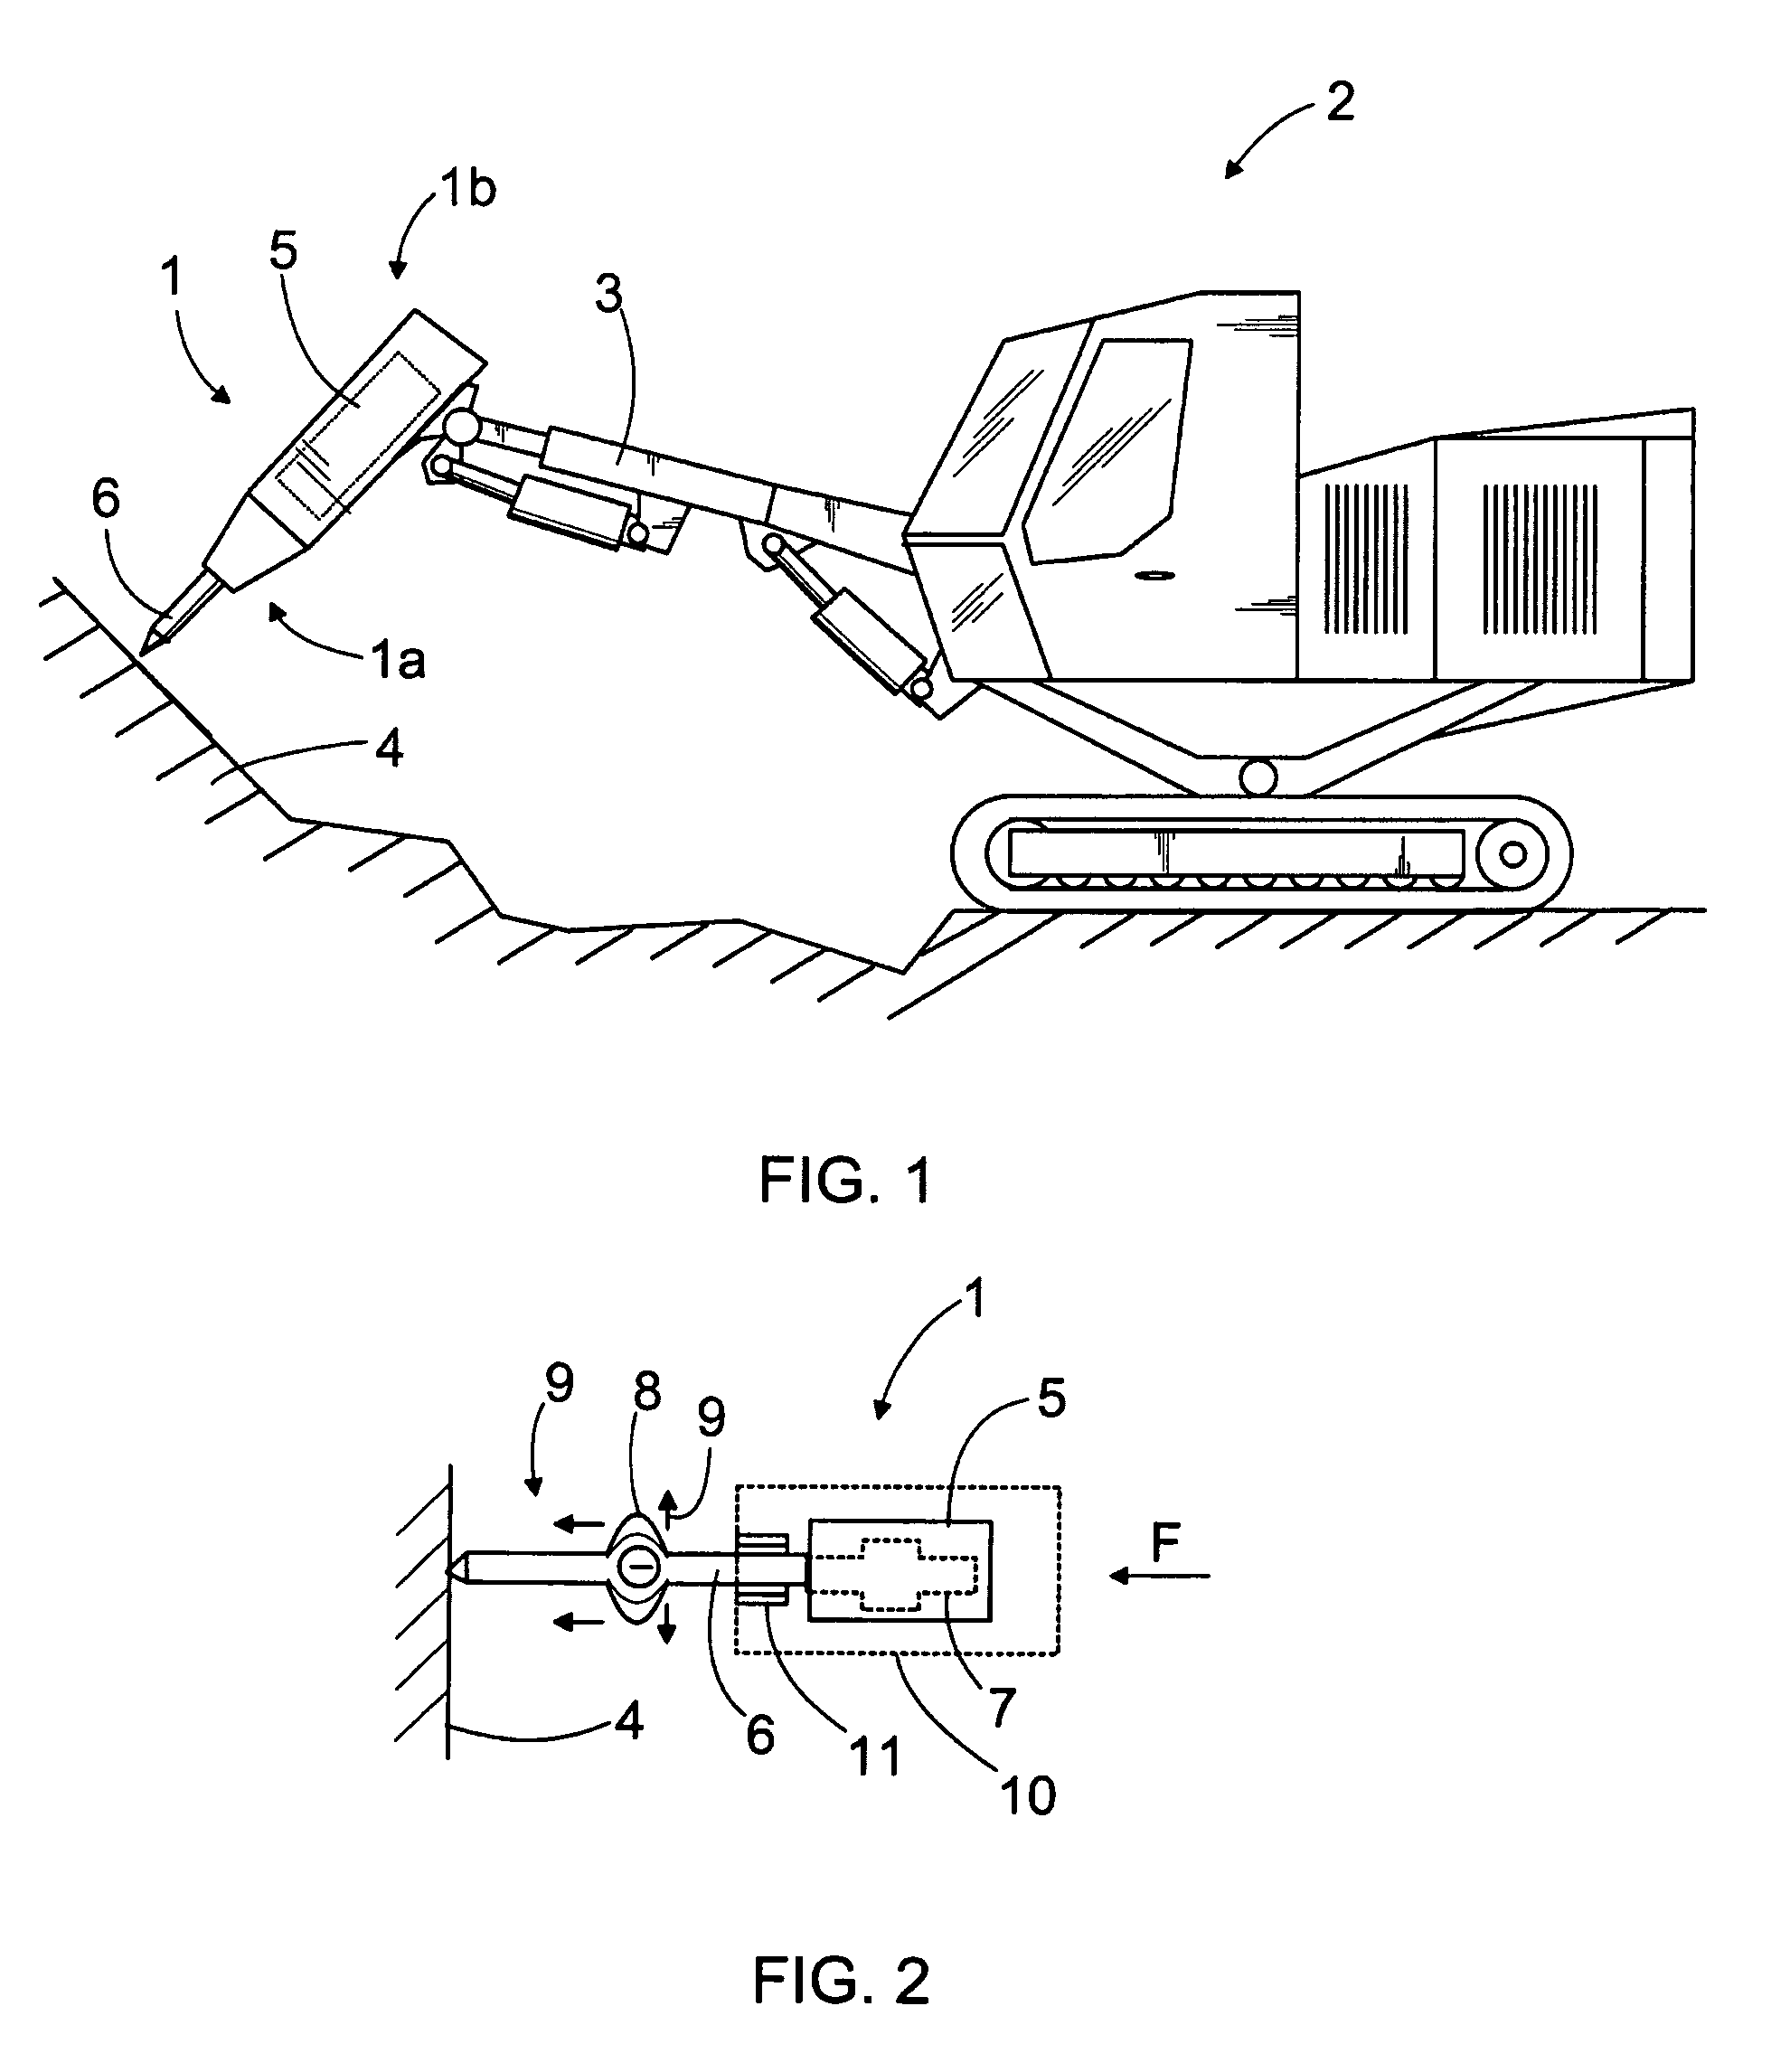 Bearing of a breaking device tool